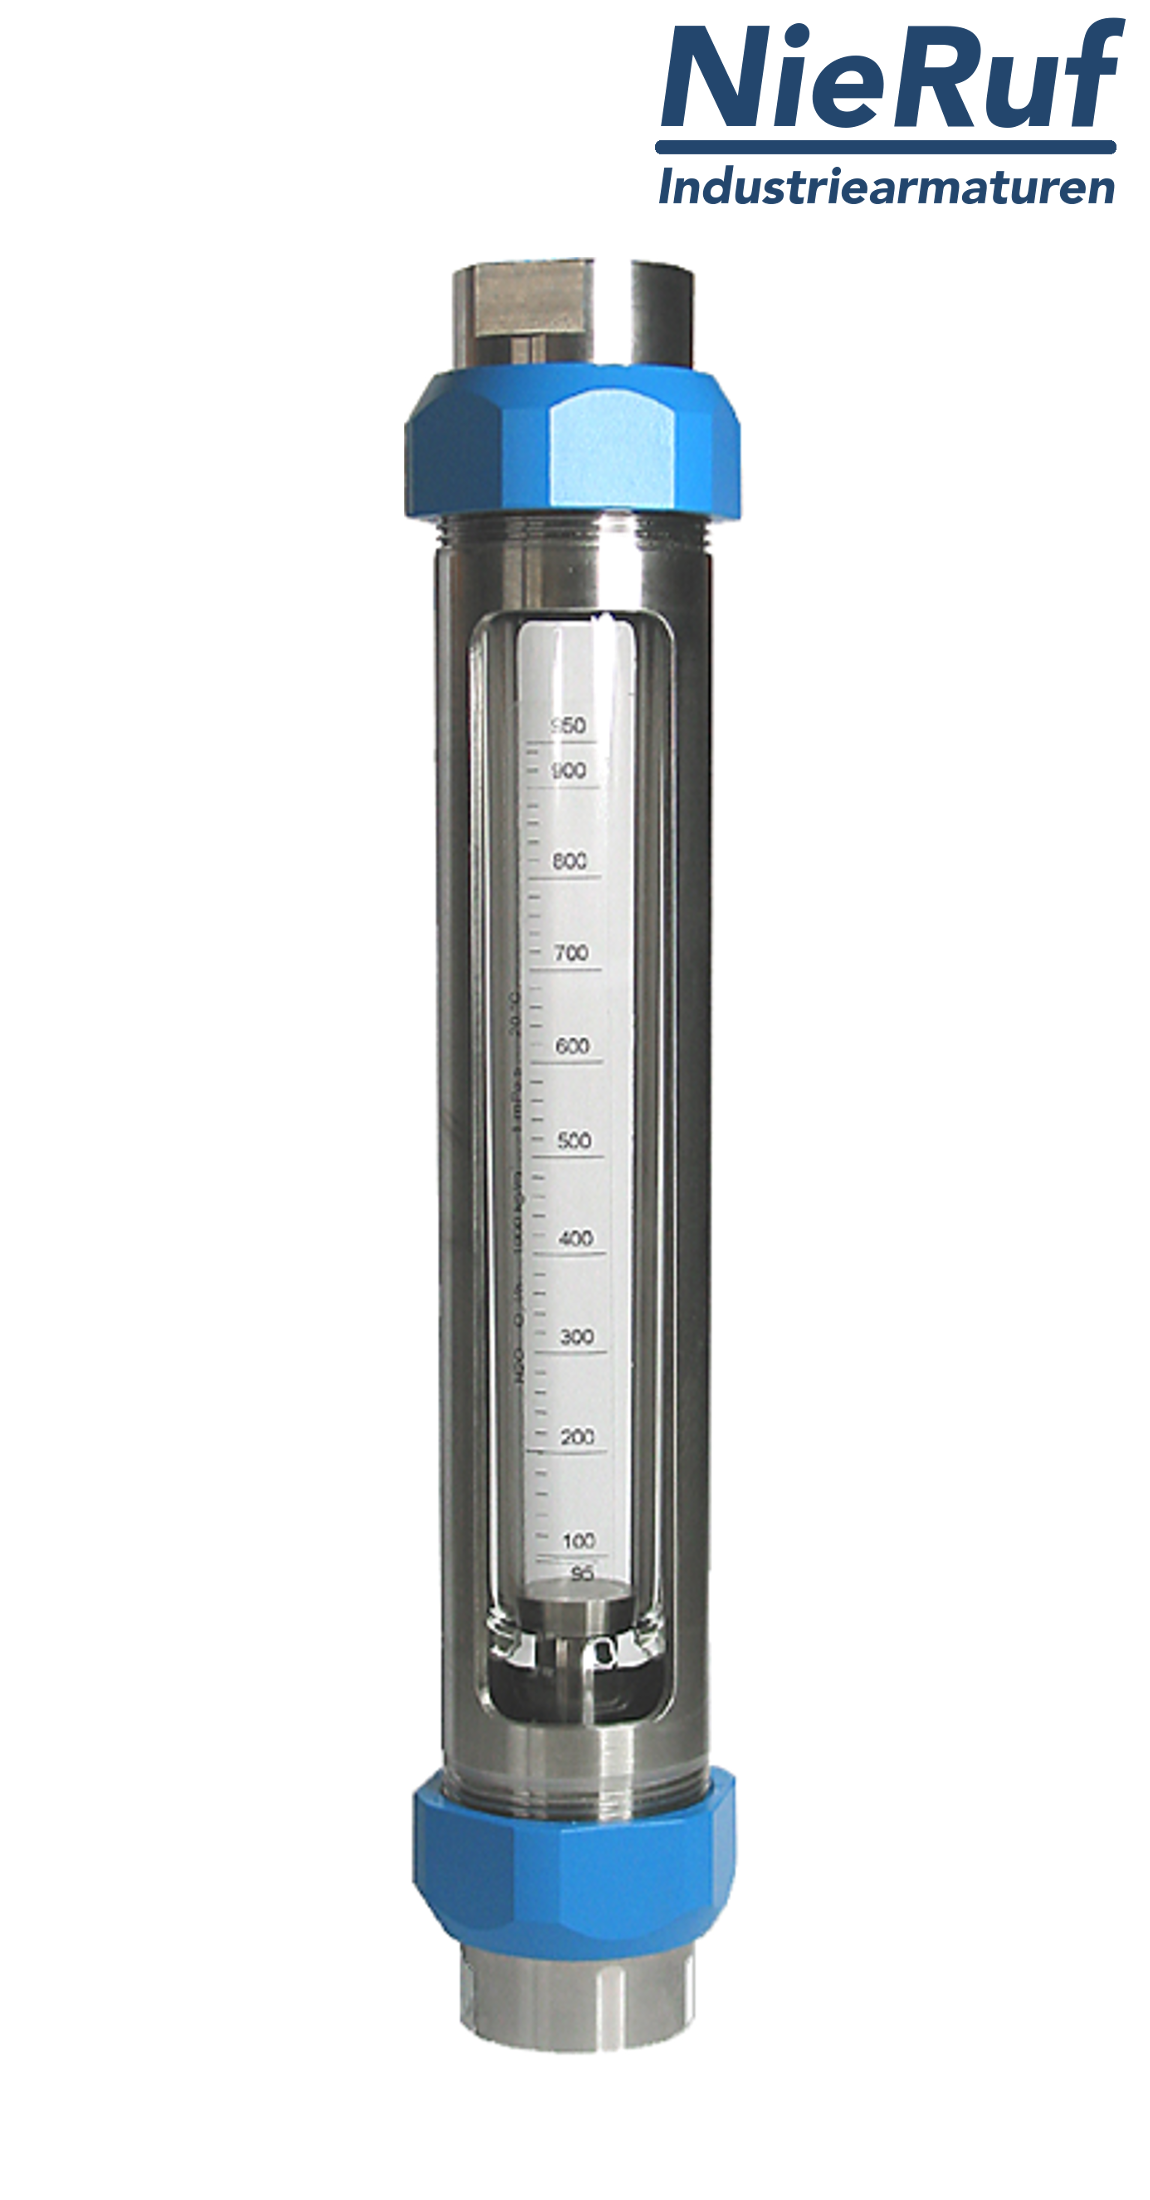 Variable area flowmeter stainless steel + borosilicate 3/4" inch 80.0 - 800 l/h water FKM